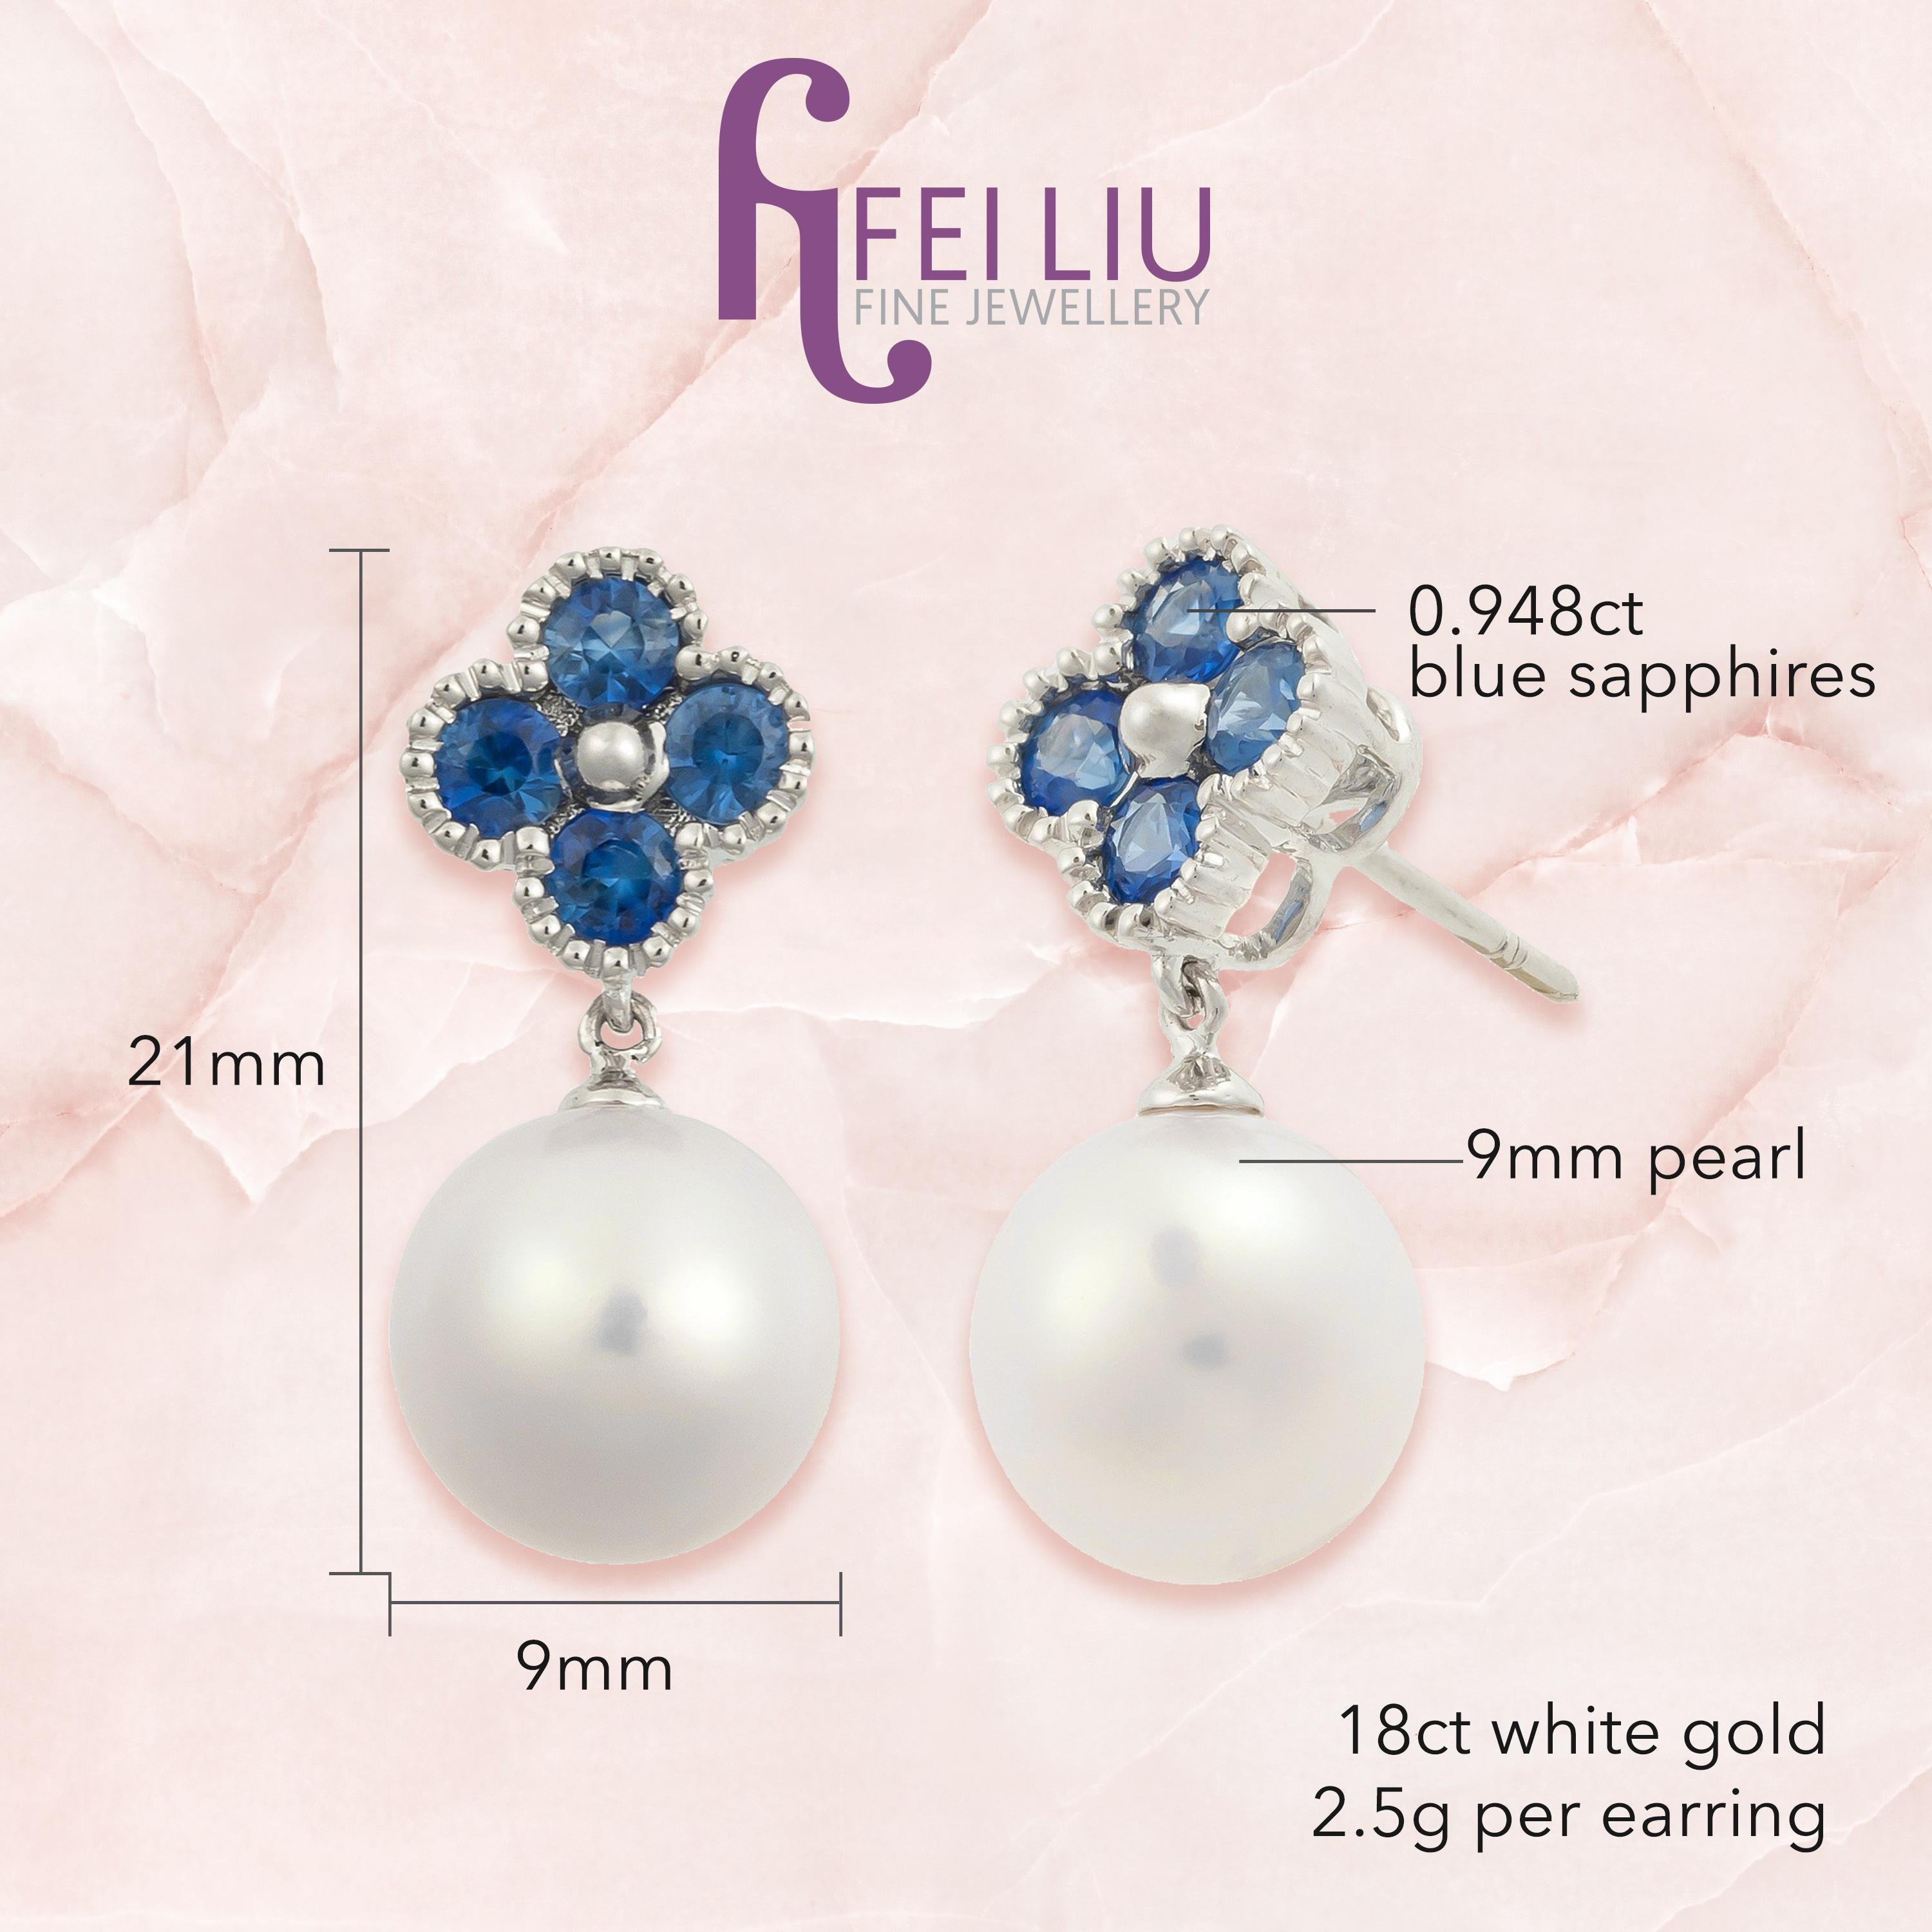 Description:
Exclusive Clover earrings with 0.948ct blue sapphires and approximately 9mm freshwater pearl, set in 18ct white gold.

Exclusive Clover necklace with 0.5ct blue sapphires and approximately 9mm freshwater pearl, set in 18ct white gold.